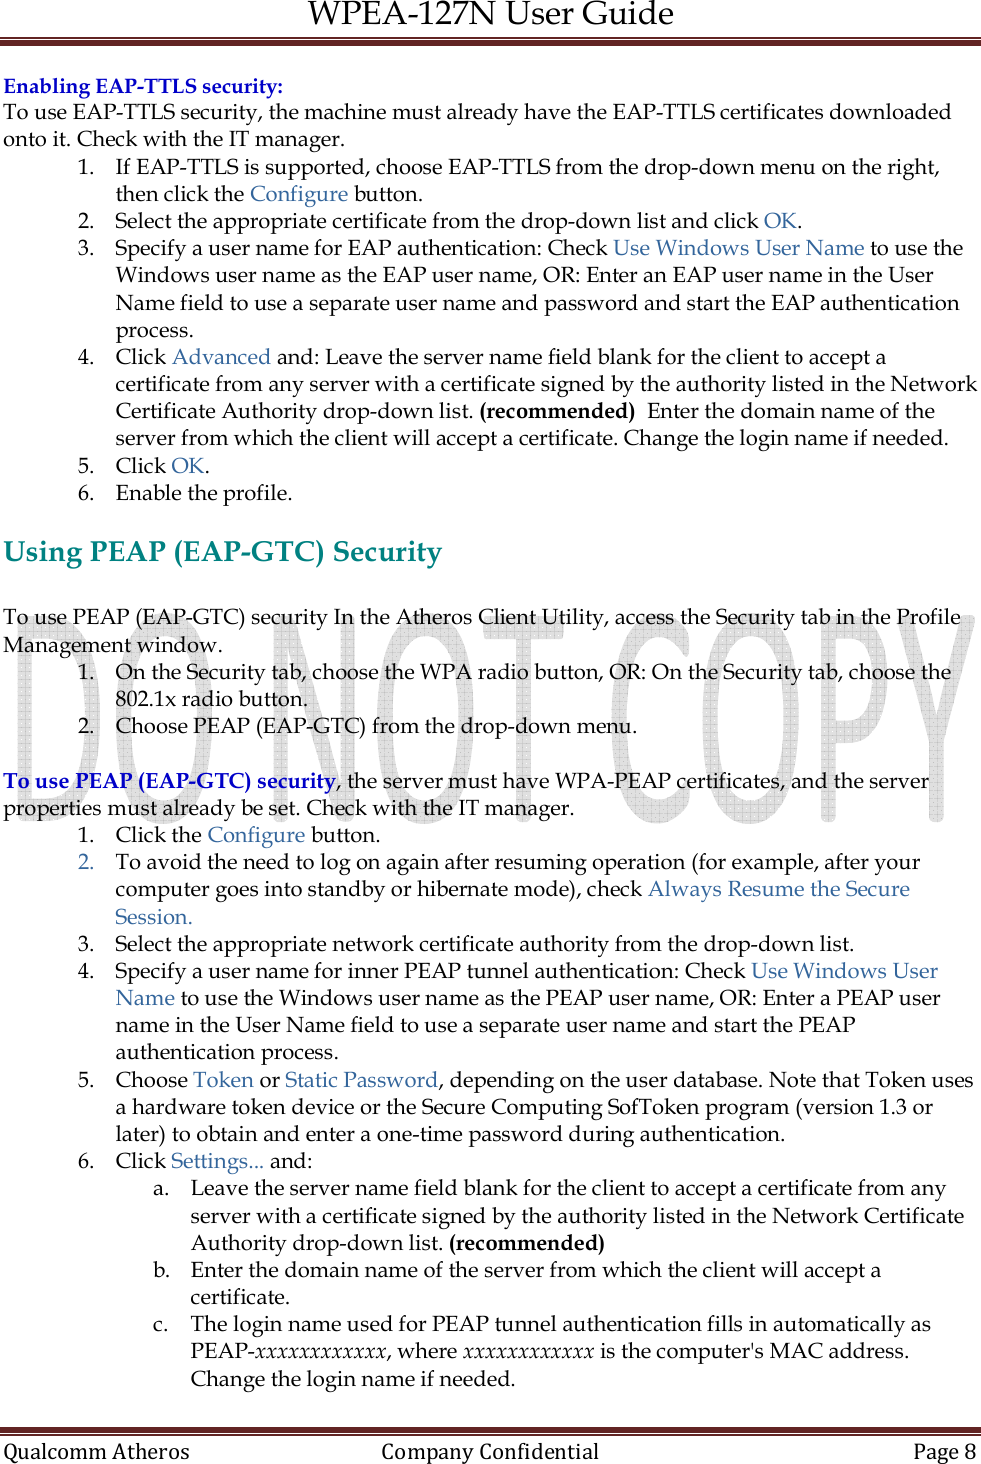 WPEA-127N User Guide  Qualcomm Atheros   Company Confidential  Page 8  Enabling EAP-TTLS security: To use EAP-TTLS security, the machine must already have the EAP-TTLS certificates downloaded onto it. Check with the IT manager. 1. If EAP-TTLS is supported, choose EAP-TTLS from the drop-down menu on the right, then click the Configure button. 2. Select the appropriate certificate from the drop-down list and click OK. 3. Specify a user name for EAP authentication: Check Use Windows User Name to use the Windows user name as the EAP user name, OR: Enter an EAP user name in the User Name field to use a separate user name and password and start the EAP authentication process. 4. Click Advanced and: Leave the server name field blank for the client to accept a certificate from any server with a certificate signed by the authority listed in the Network Certificate Authority drop-down list. (recommended)  Enter the domain name of the server from which the client will accept a certificate. Change the login name if needed. 5. Click OK. 6. Enable the profile.  Using PEAP (EAP-GTC) Security  To use PEAP (EAP-GTC) security In the Atheros Client Utility, access the Security tab in the Profile Management window. 1. On the Security tab, choose the WPA radio button, OR: On the Security tab, choose the 802.1x radio button. 2. Choose PEAP (EAP-GTC) from the drop-down menu.  To use PEAP (EAP-GTC) security, the server must have WPA-PEAP certificates, and the server properties must already be set. Check with the IT manager. 1. Click the Configure button. 2. To avoid the need to log on again after resuming operation (for example, after your computer goes into standby or hibernate mode), check Always Resume the Secure Session. 3. Select the appropriate network certificate authority from the drop-down list. 4. Specify a user name for inner PEAP tunnel authentication: Check Use Windows User Name to use the Windows user name as the PEAP user name, OR: Enter a PEAP user name in the User Name field to use a separate user name and start the PEAP authentication process. 5. Choose Token or Static Password, depending on the user database. Note that Token uses a hardware token device or the Secure Computing SofToken program (version 1.3 or later) to obtain and enter a one-time password during authentication. 6. Click Settings... and:  a. Leave the server name field blank for the client to accept a certificate from any server with a certificate signed by the authority listed in the Network Certificate Authority drop-down list. (recommended)  b. Enter the domain name of the server from which the client will accept a certificate.  c. The login name used for PEAP tunnel authentication fills in automatically as PEAP-xxxxxxxxxxxx, where xxxxxxxxxxxx is the computer&apos;s MAC address. Change the login name if needed. 